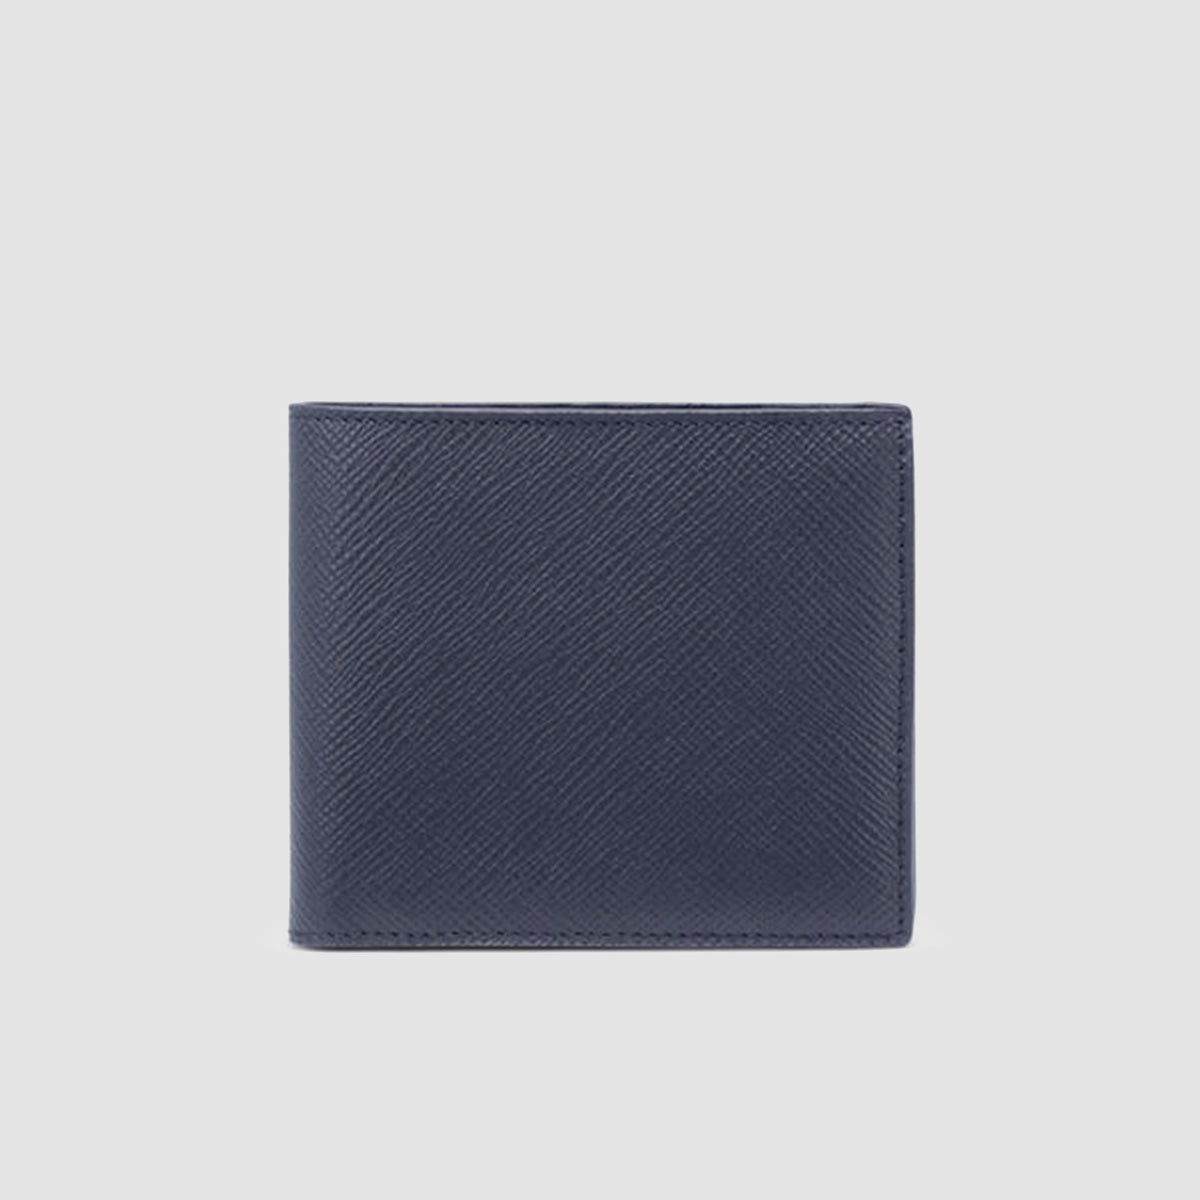 4 Card Slot Wallet with Coin Case in Panama - Navy